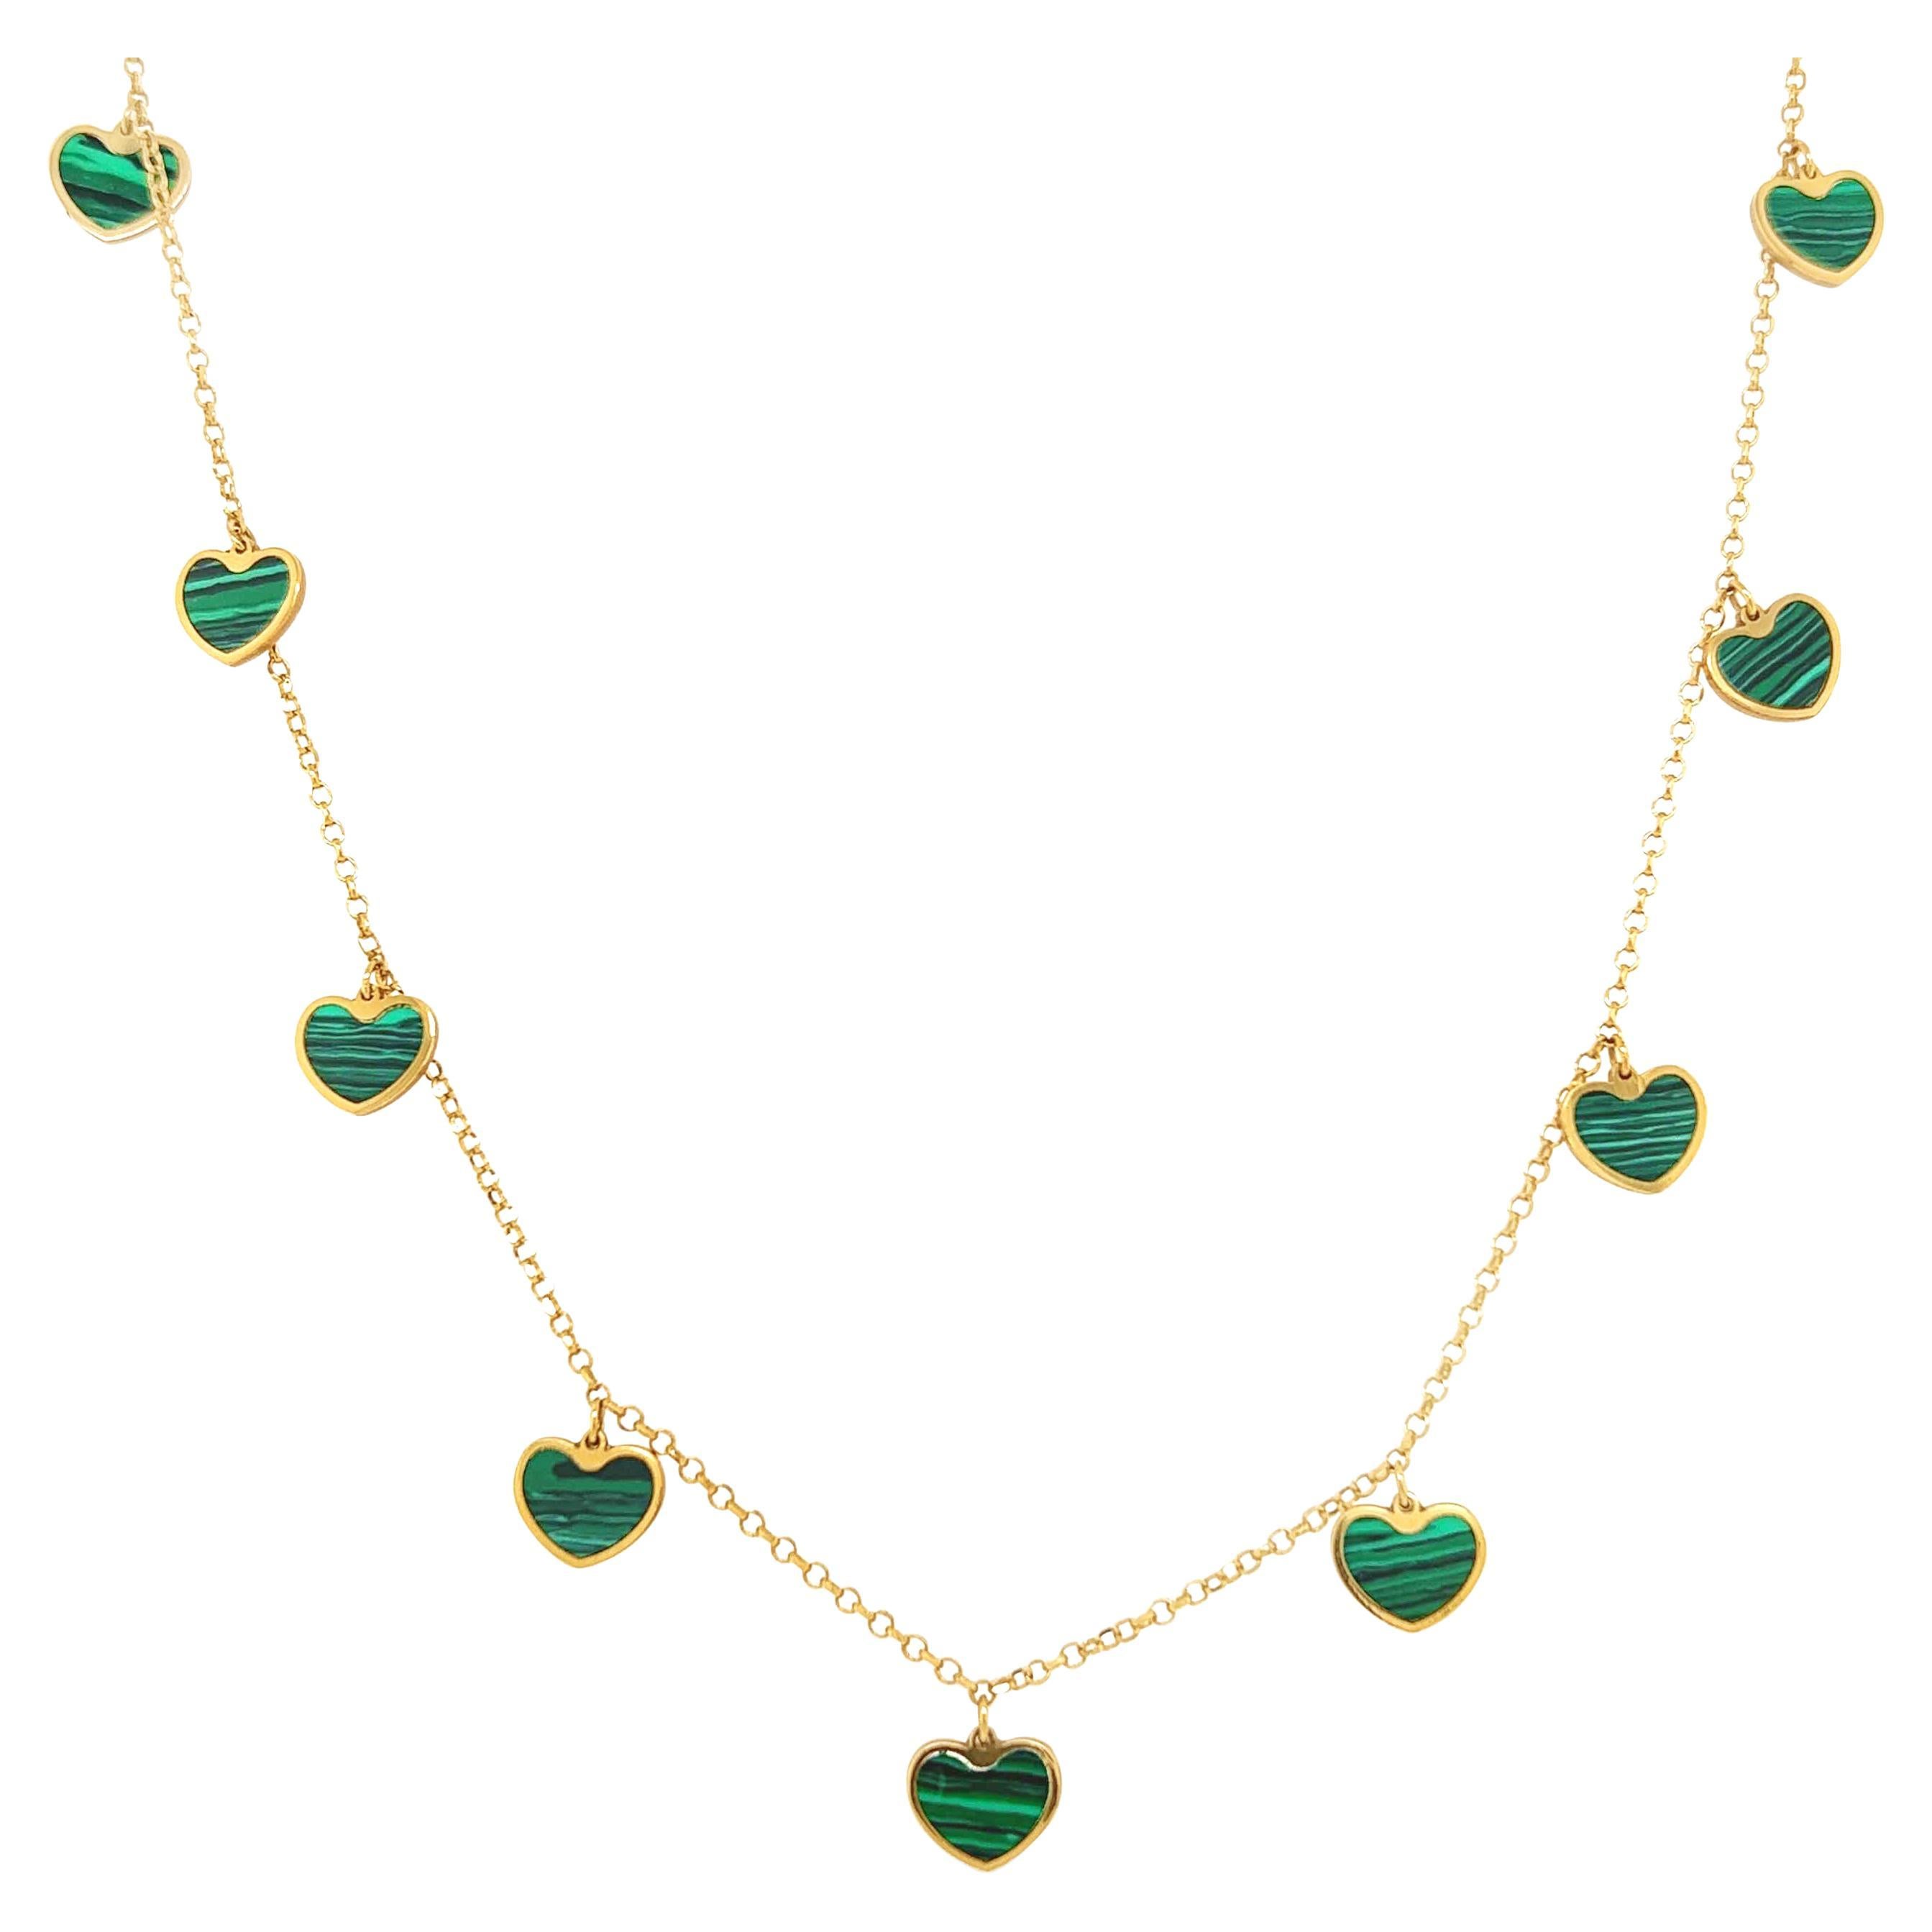 Many of our items include UK VAT at 20%. This means we may be able to remove this when you are purchasing from outside of the UK. Please message us if you would like to know about a specific item.
Material: 14ct Yellow Gold
Gemstone: Malachite
Total